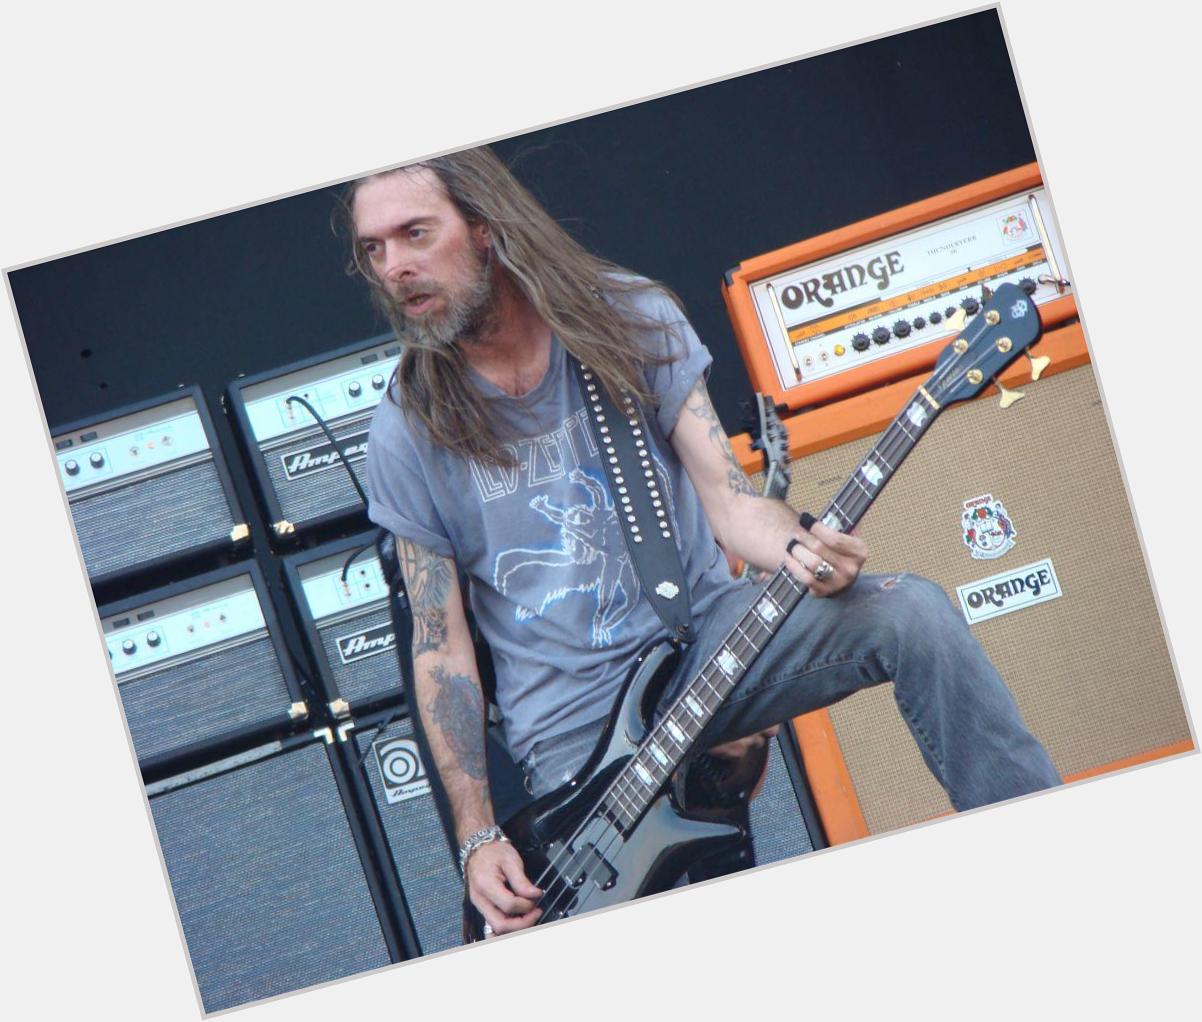 Happy Birthday Rex Brown! Born July 27th, 1964. Rex has played bass in Pantera, Down, & currently Kill Devil Hill. 